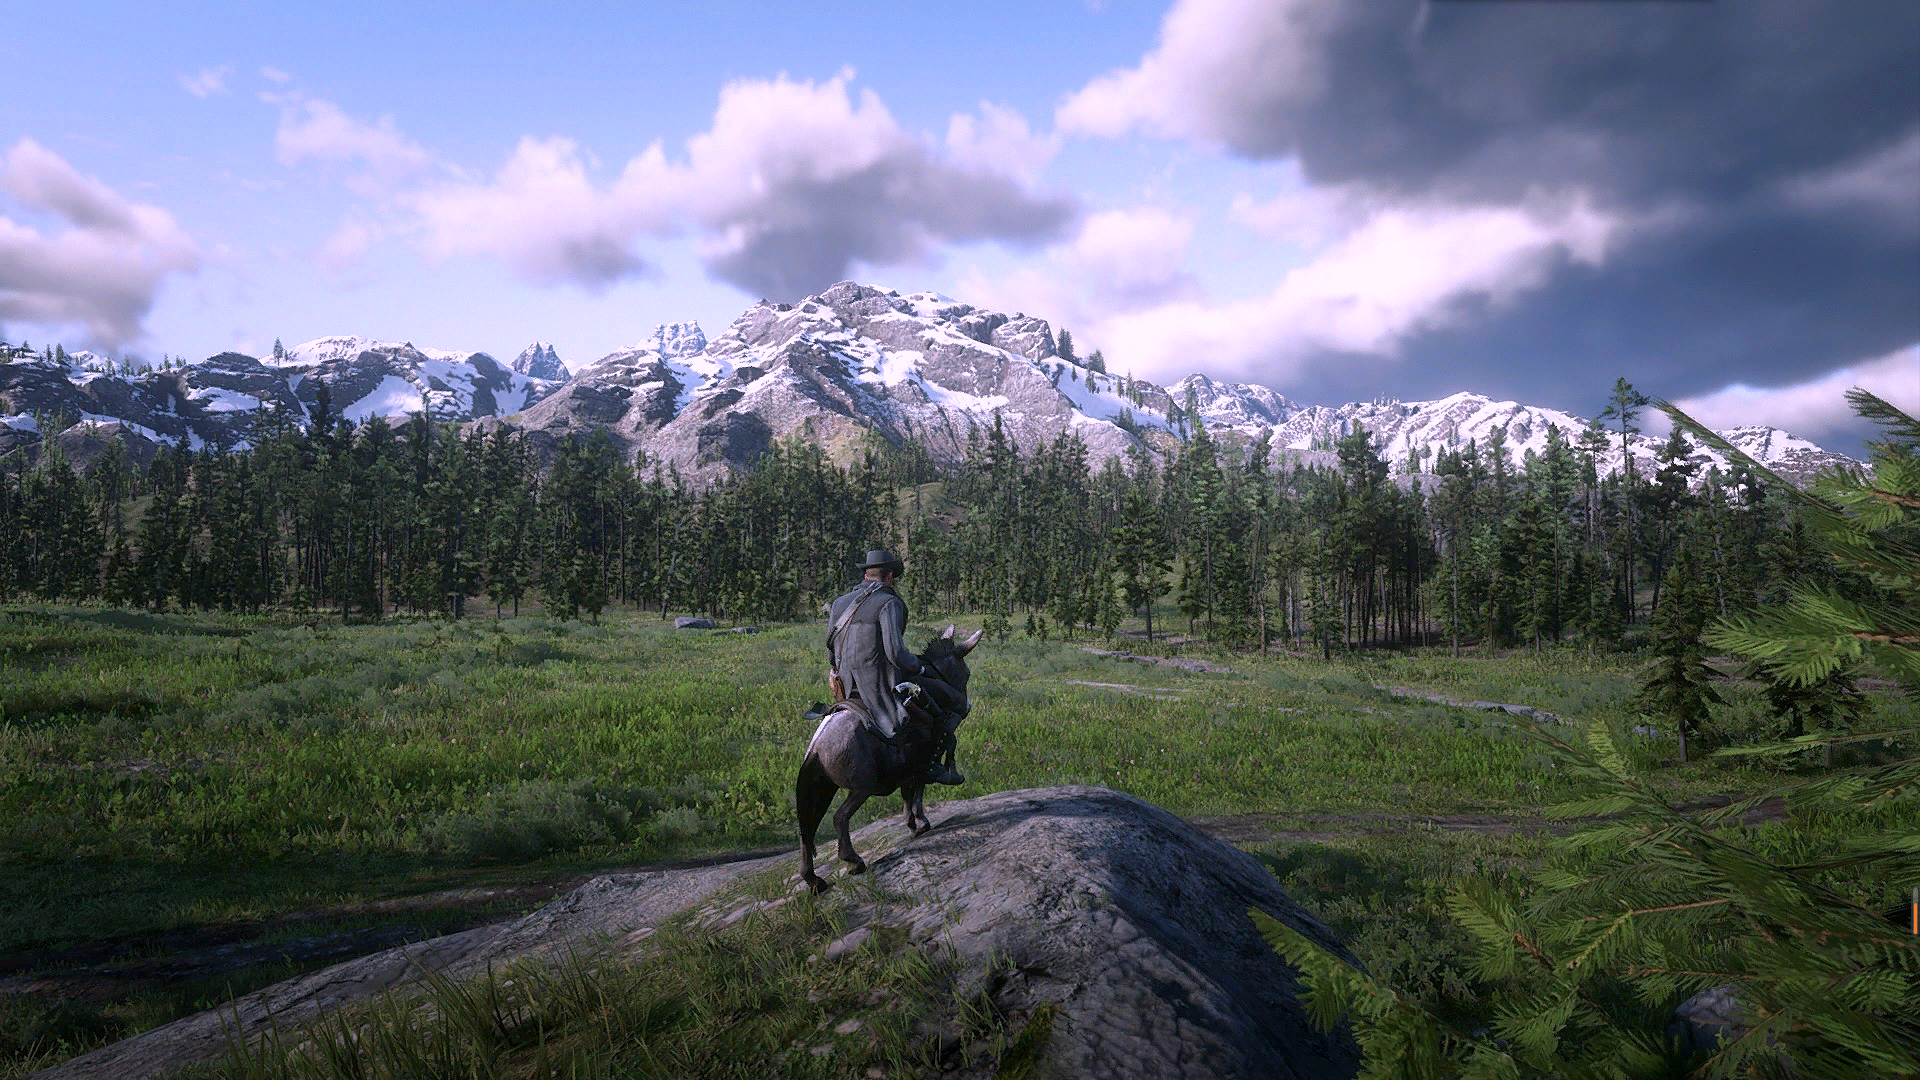 General 1920x1080 Red Dead Redemption 2 sky Rockstar Games mountains video games donkey video game characters CGI video game art screen shot trees nature clouds snowy mountain snow